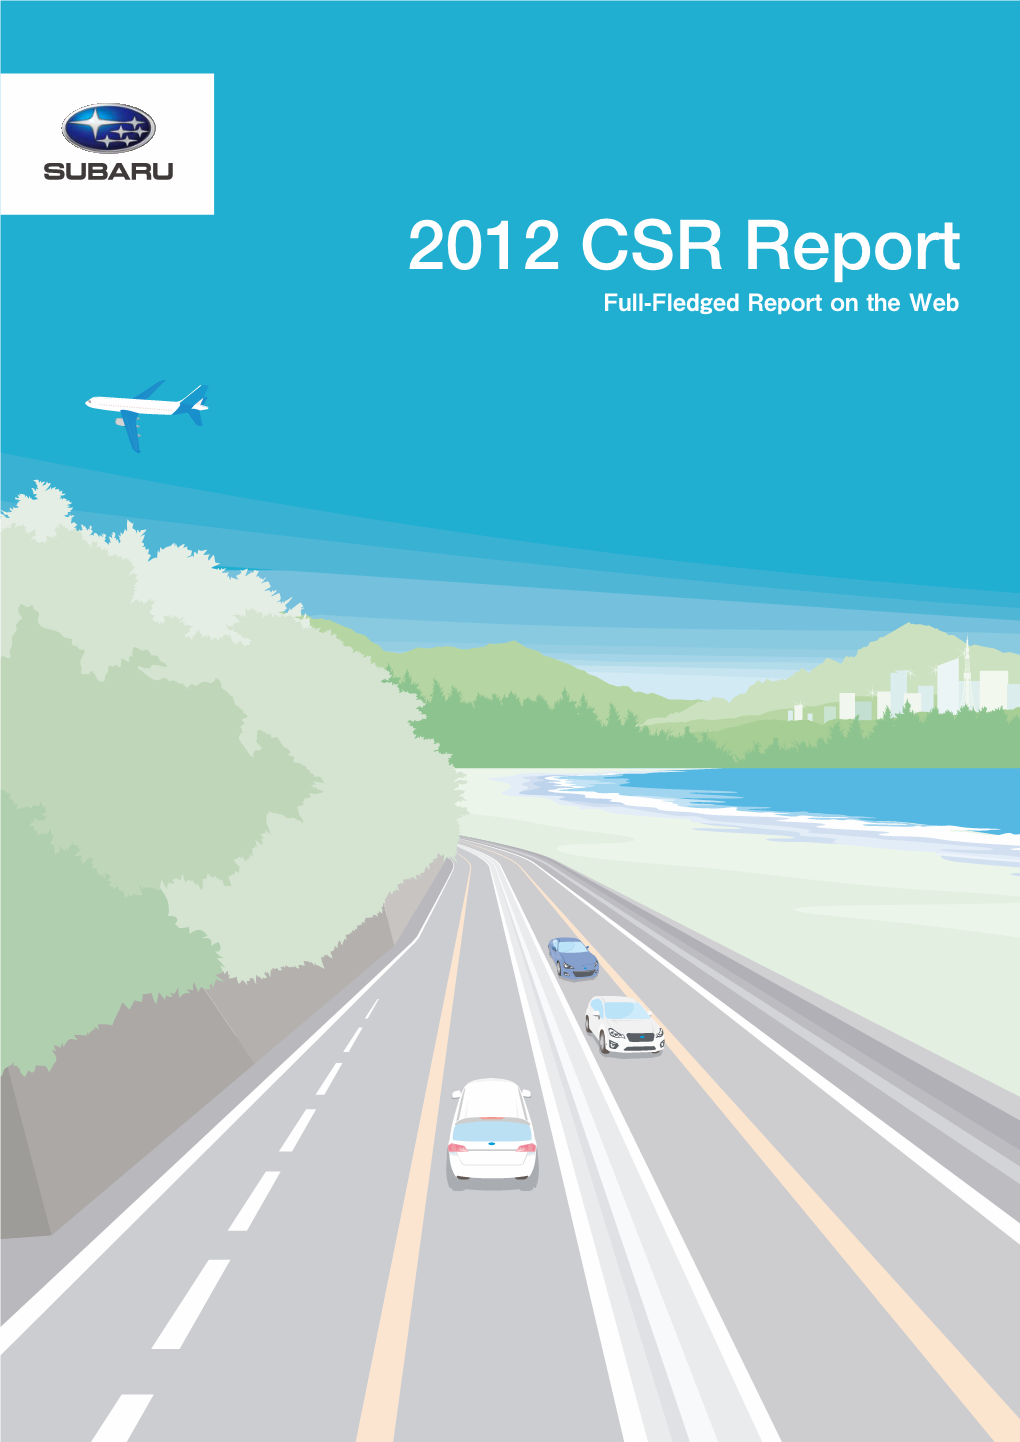 2012 CSR Report Full-Fledged Report on the Web